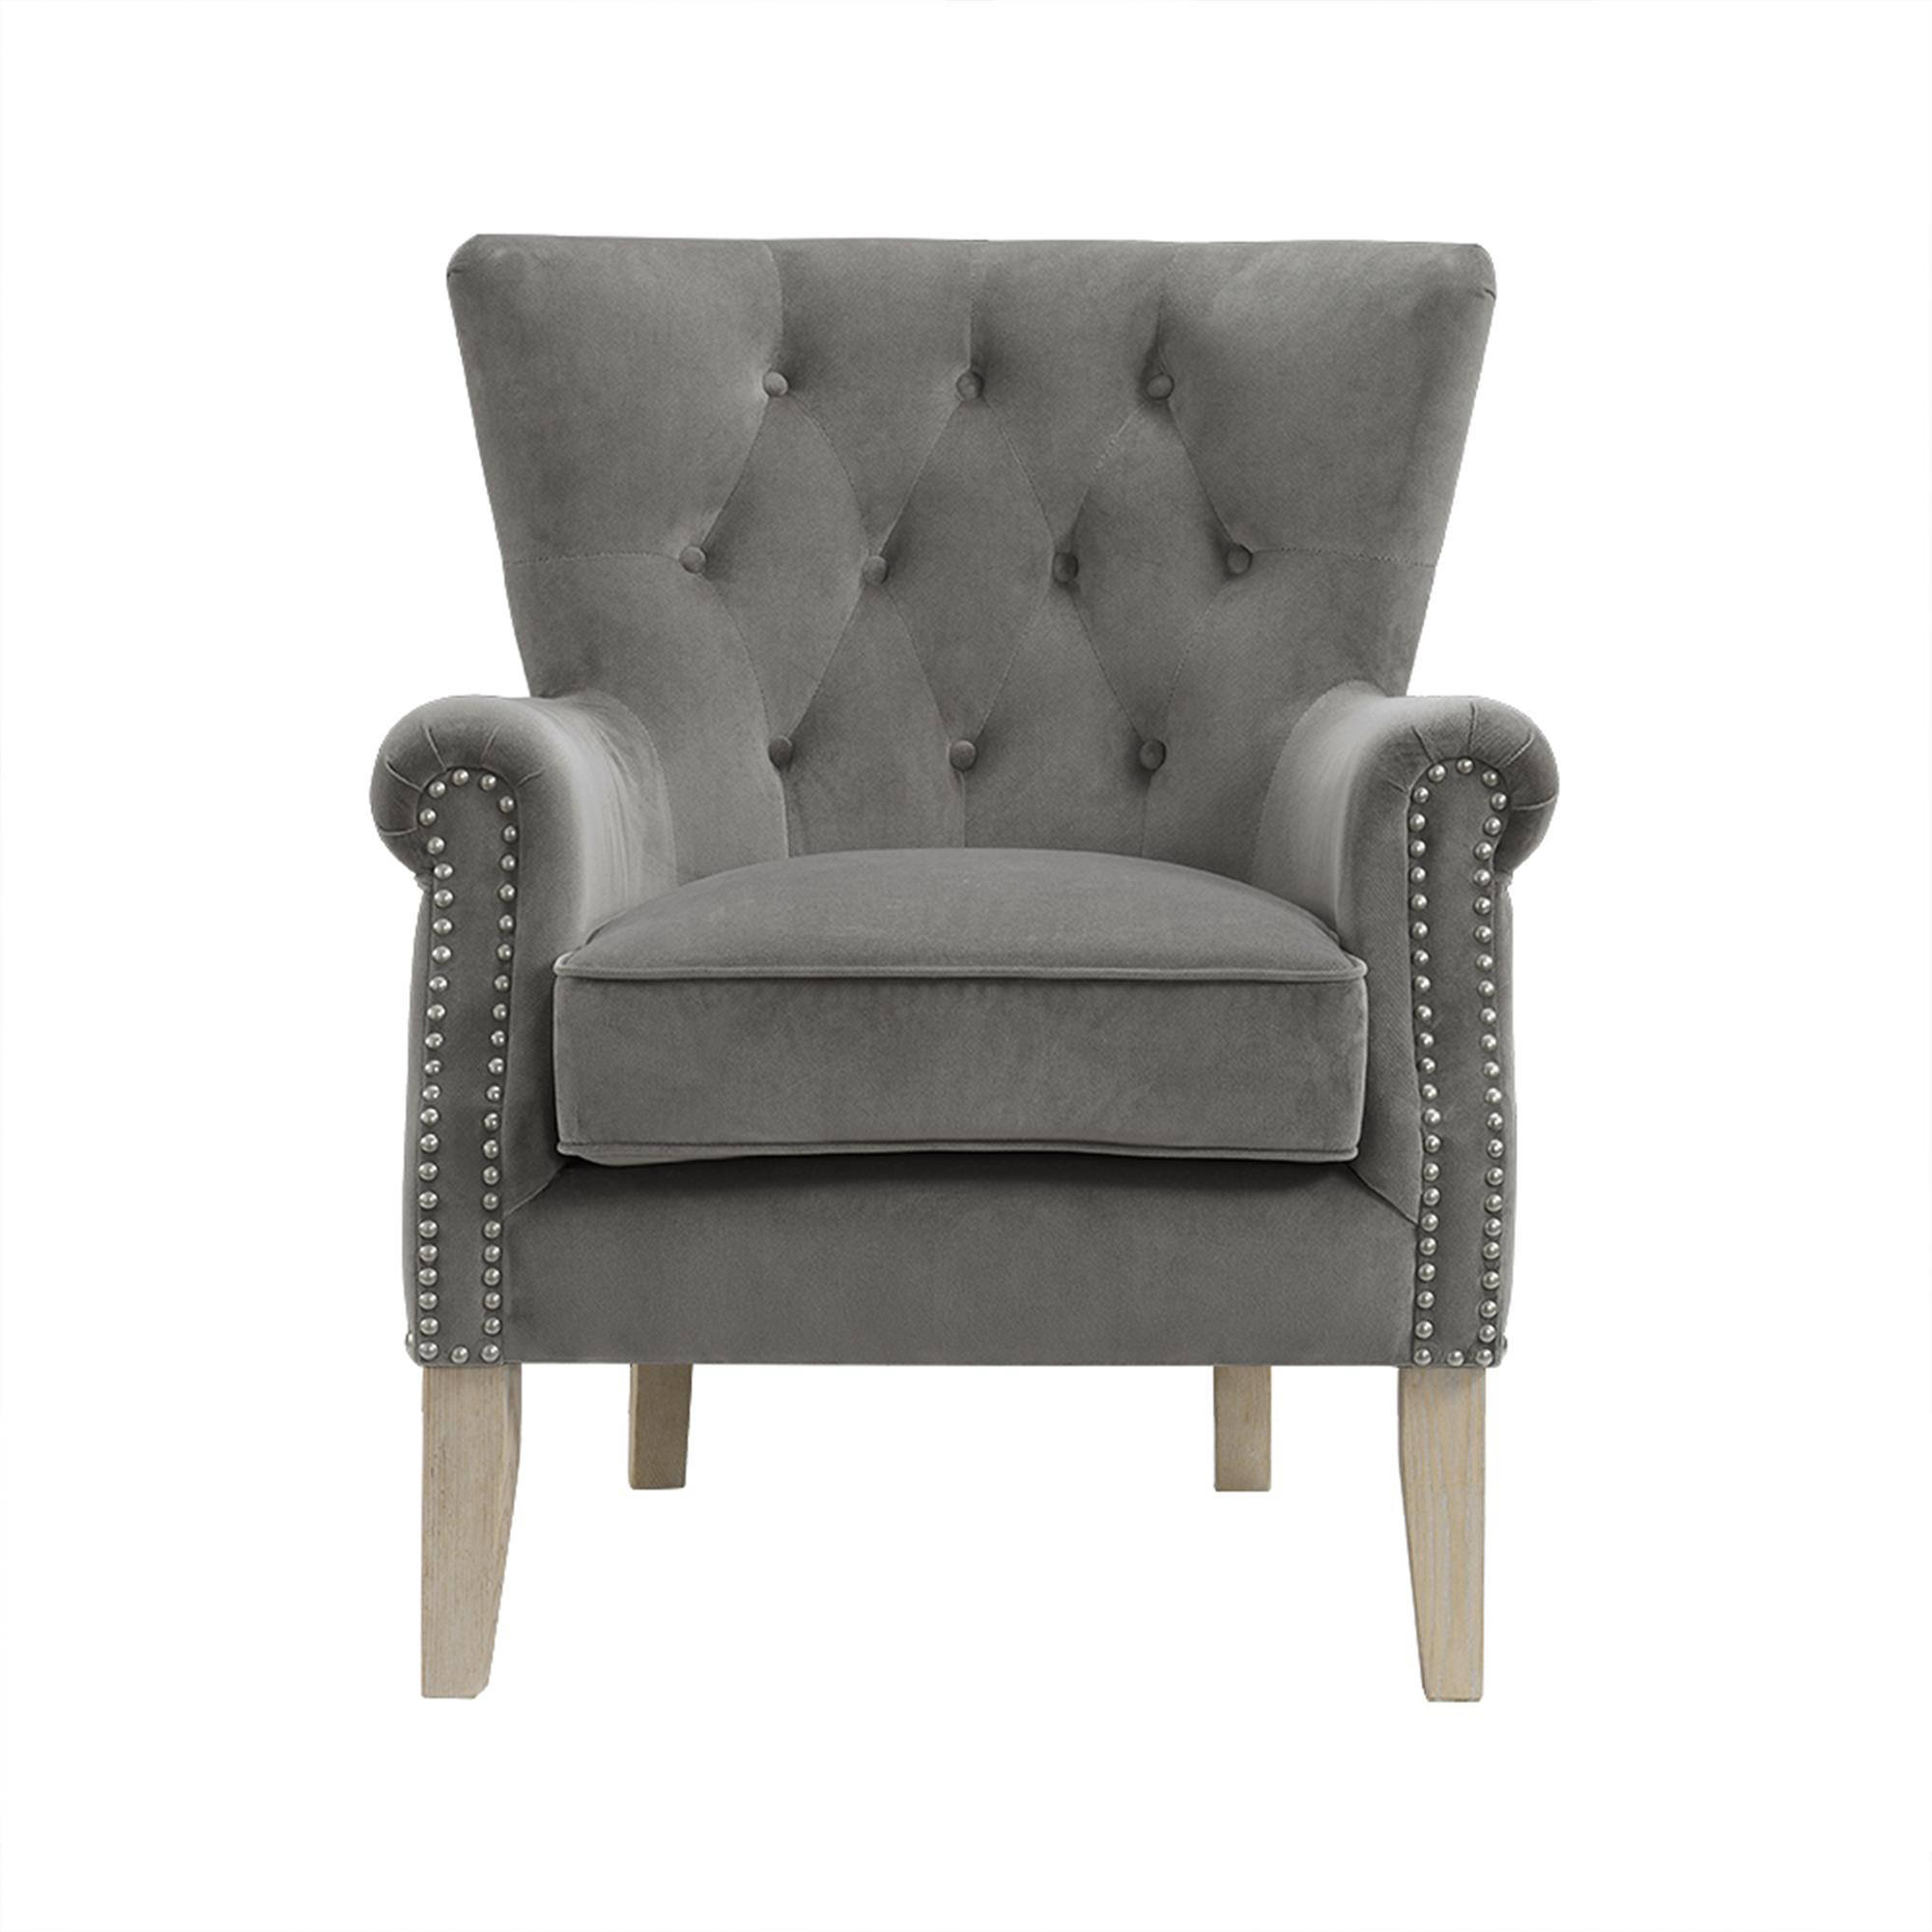 Better Homes & Gardens Accent Chair, Living Room & Home Office, Gray - image 1 of 5